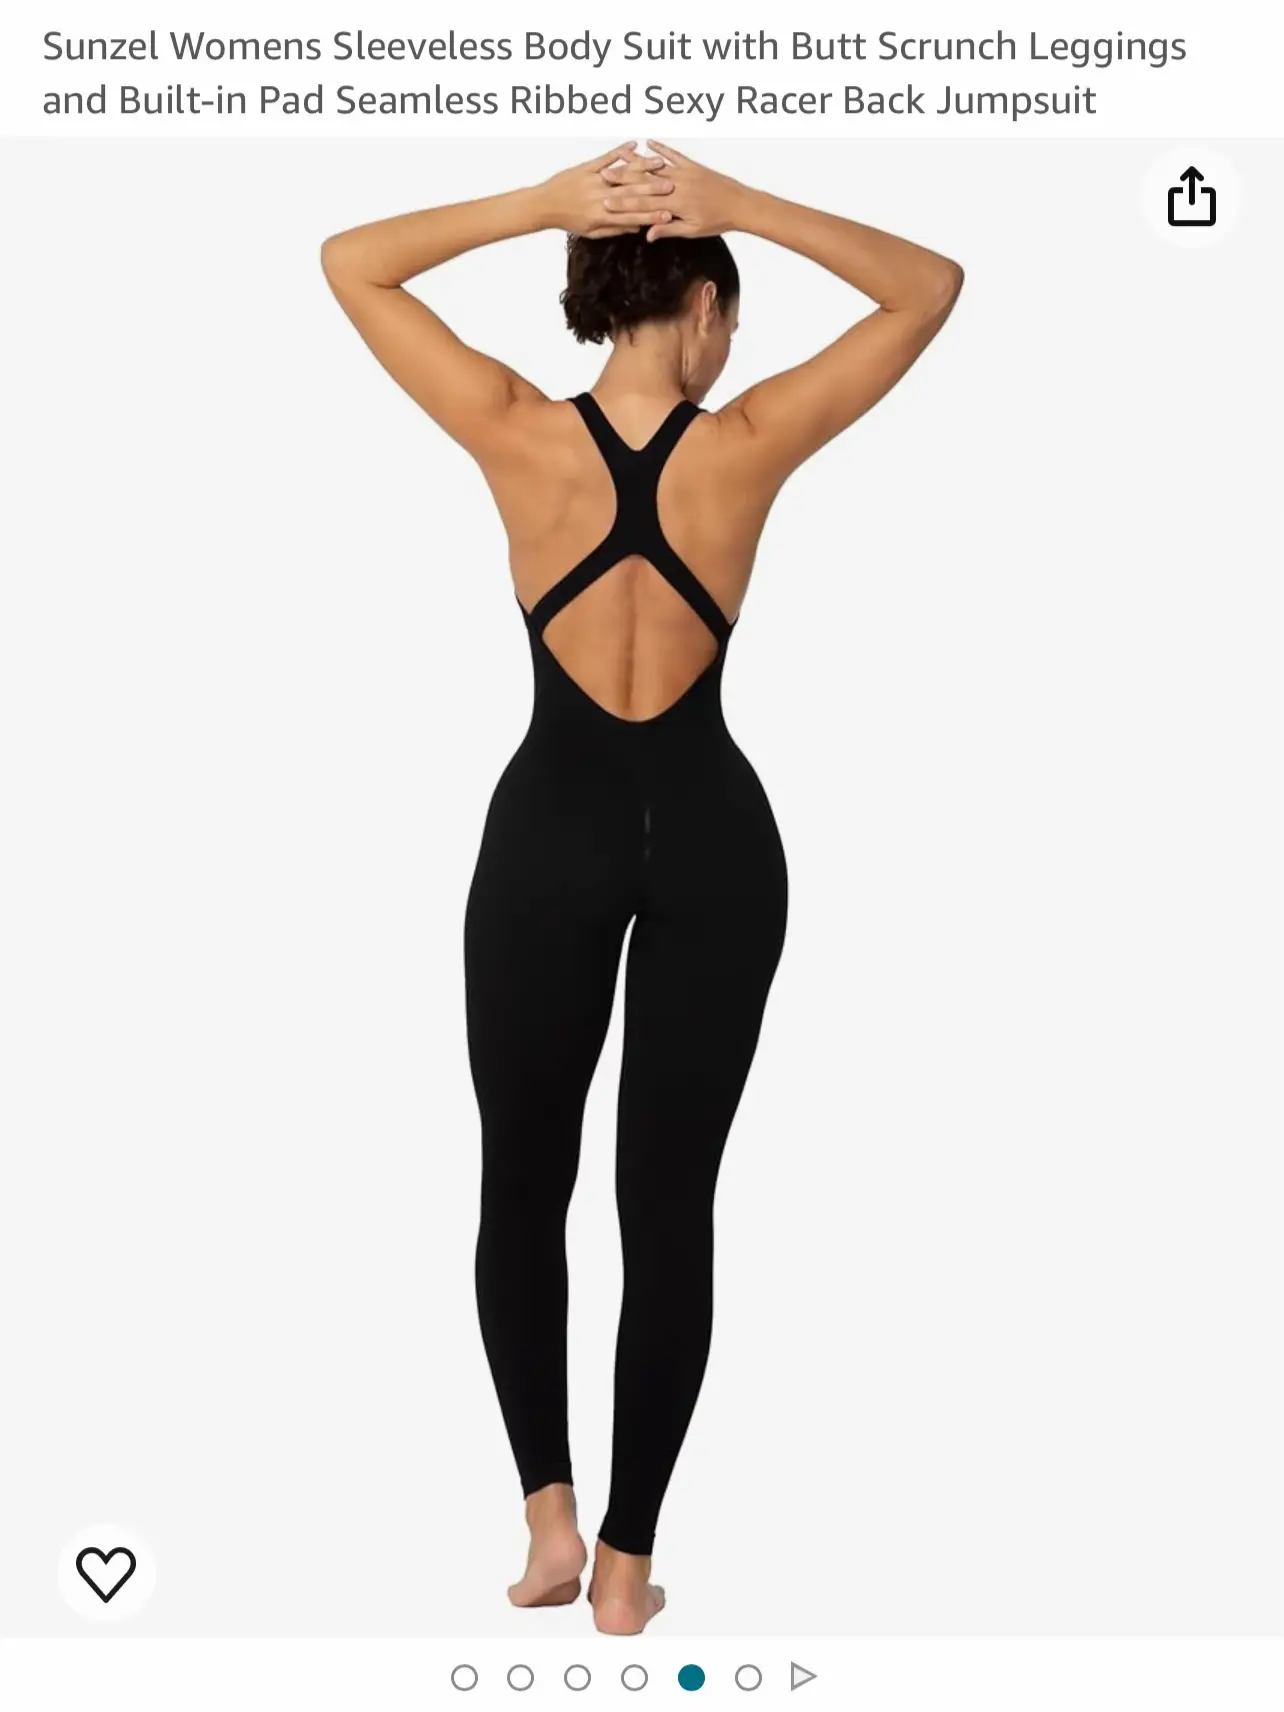  Sunzel Workout Jumpsuit Women Backless One Piece Sleeveless  Rompers Scrunch Bodysuits Gym Yoga Tummy Control Padded Bras : Clothing,  Shoes & Jewelry